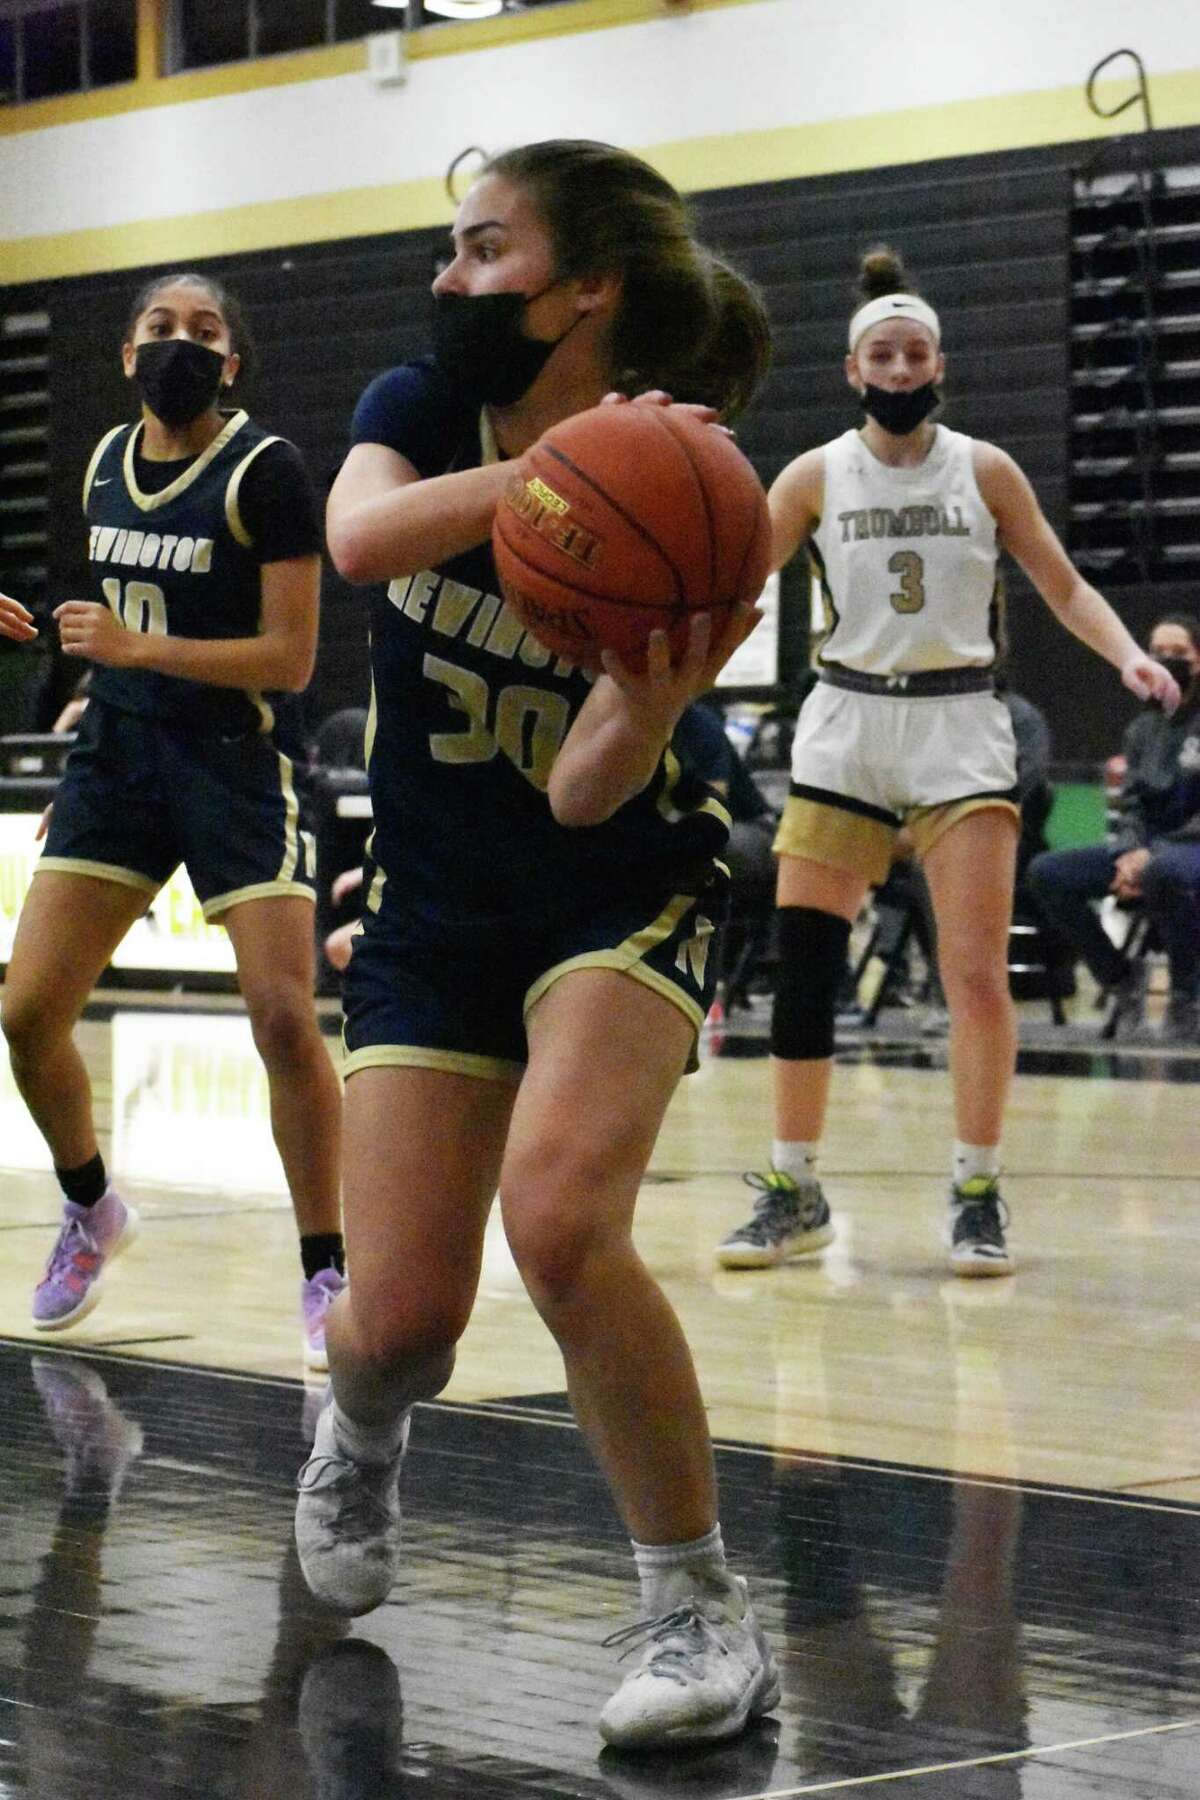 Newington's Marlie Zocco saves the ball from going out of bounds during a girls basketball game between Trumbull and Newington at Trumbull High, Trumbull on Saturday, Jan. 8, 2022.